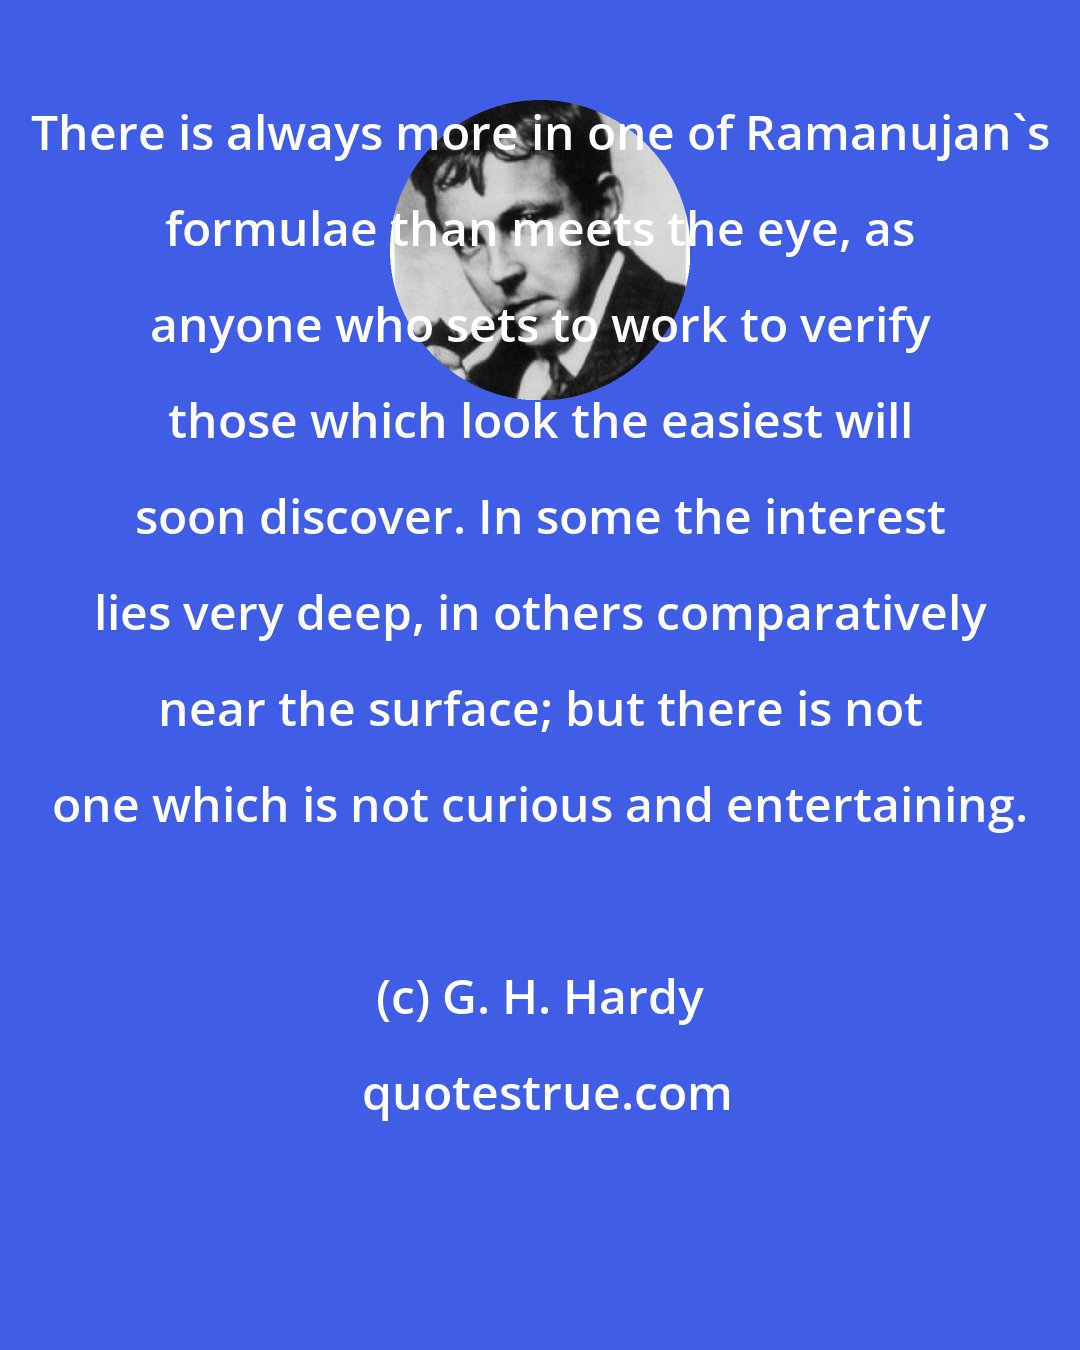 G. H. Hardy: There is always more in one of Ramanujan's formulae than meets the eye, as anyone who sets to work to verify those which look the easiest will soon discover. In some the interest lies very deep, in others comparatively near the surface; but there is not one which is not curious and entertaining.